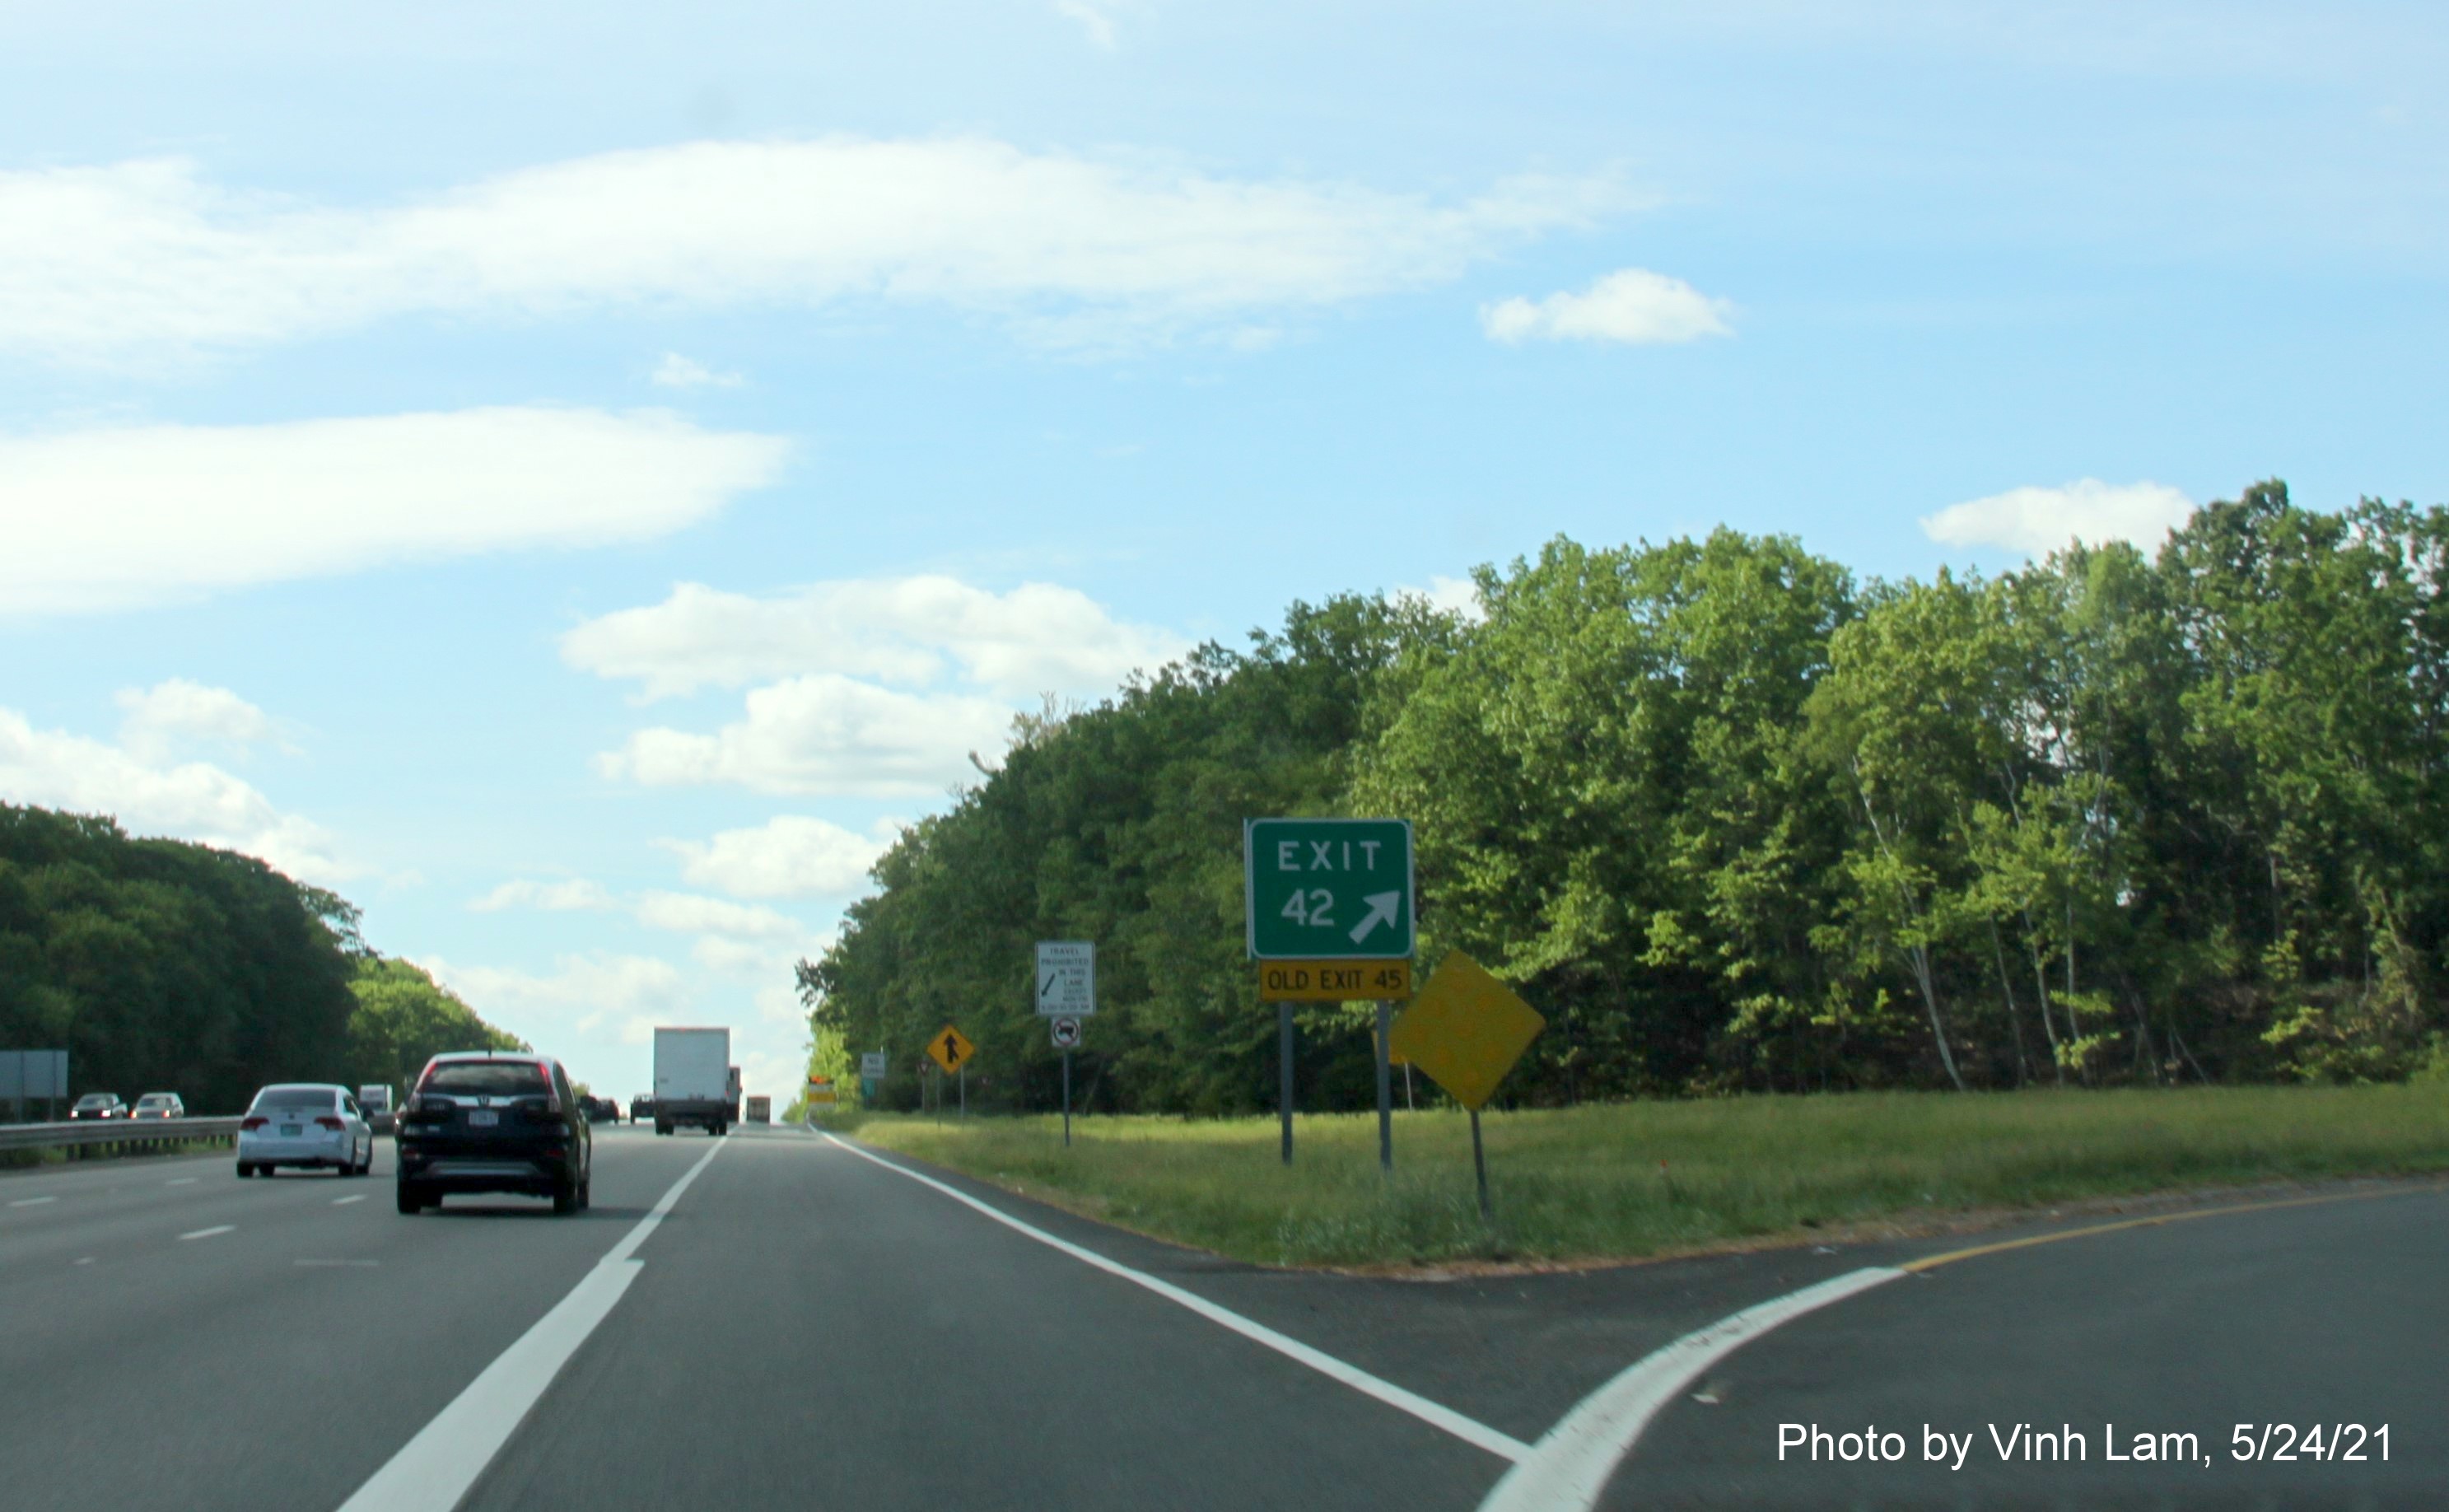 Image of gore sign for River Road exit with new milepost based exit number and yellow Old Exit 45 sign attached below on I-93 South in Andover, by Vinh Lam, May 2021